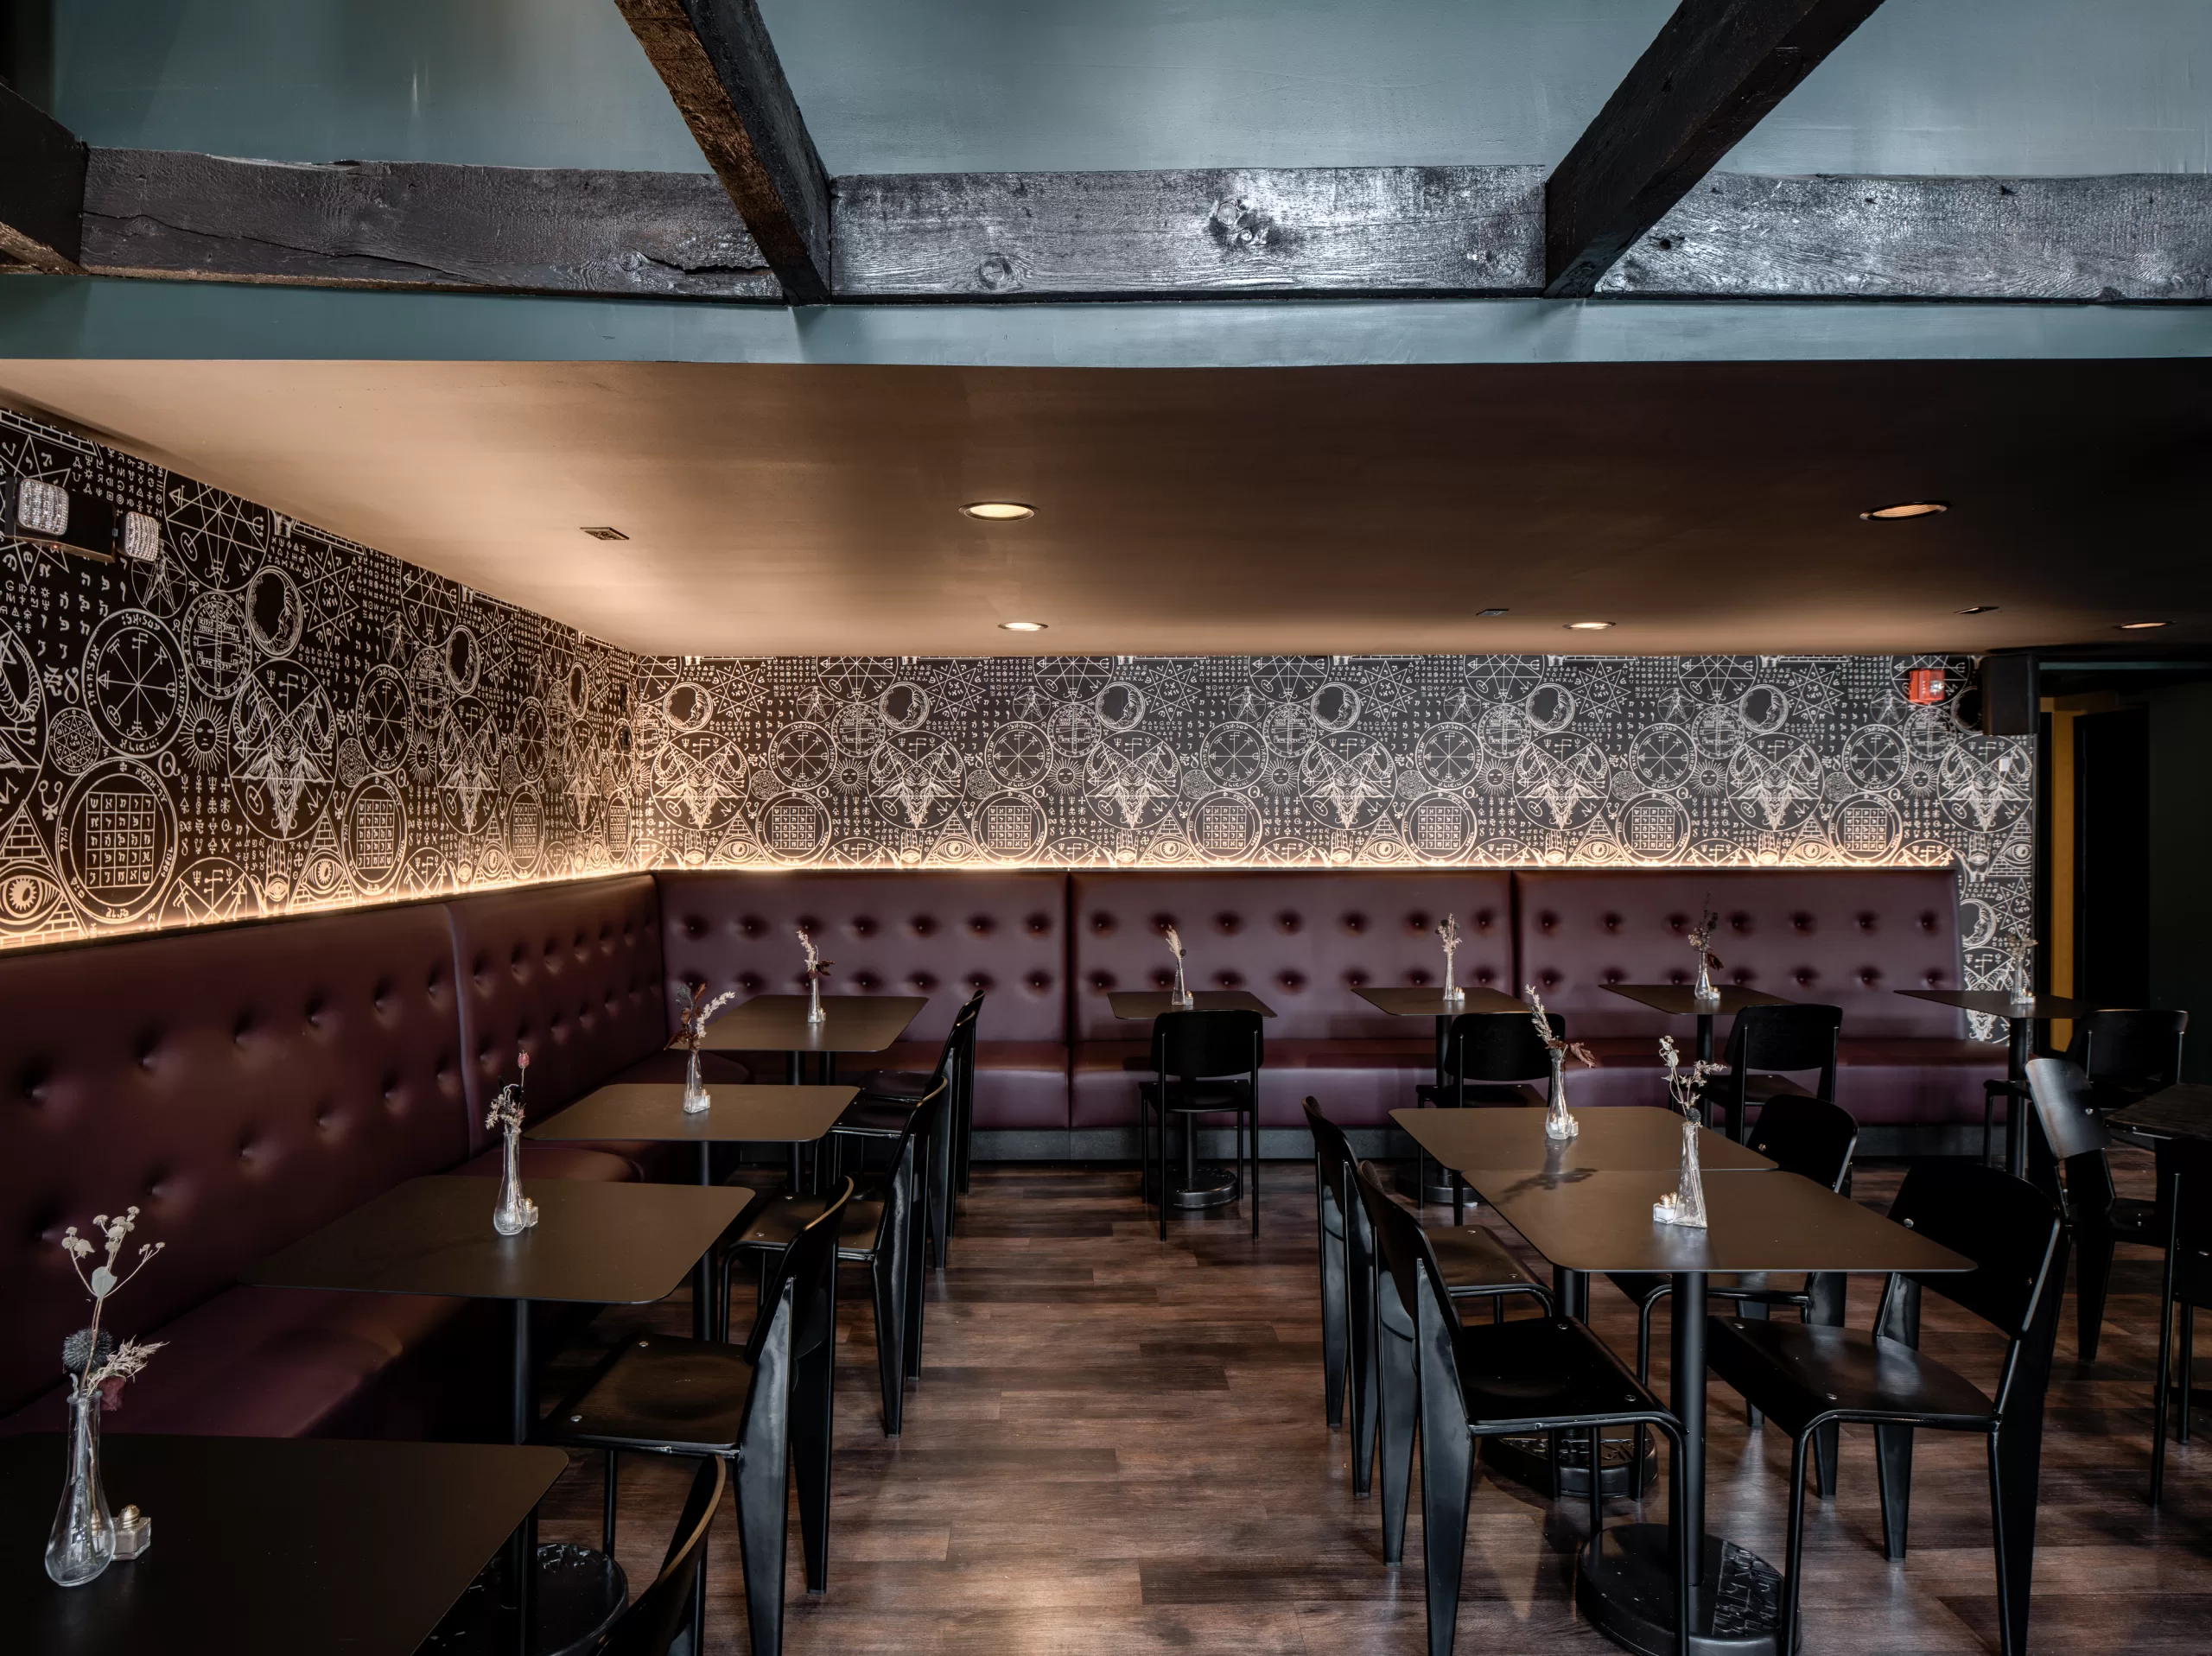 Interior of coffin bar, banquette seating 